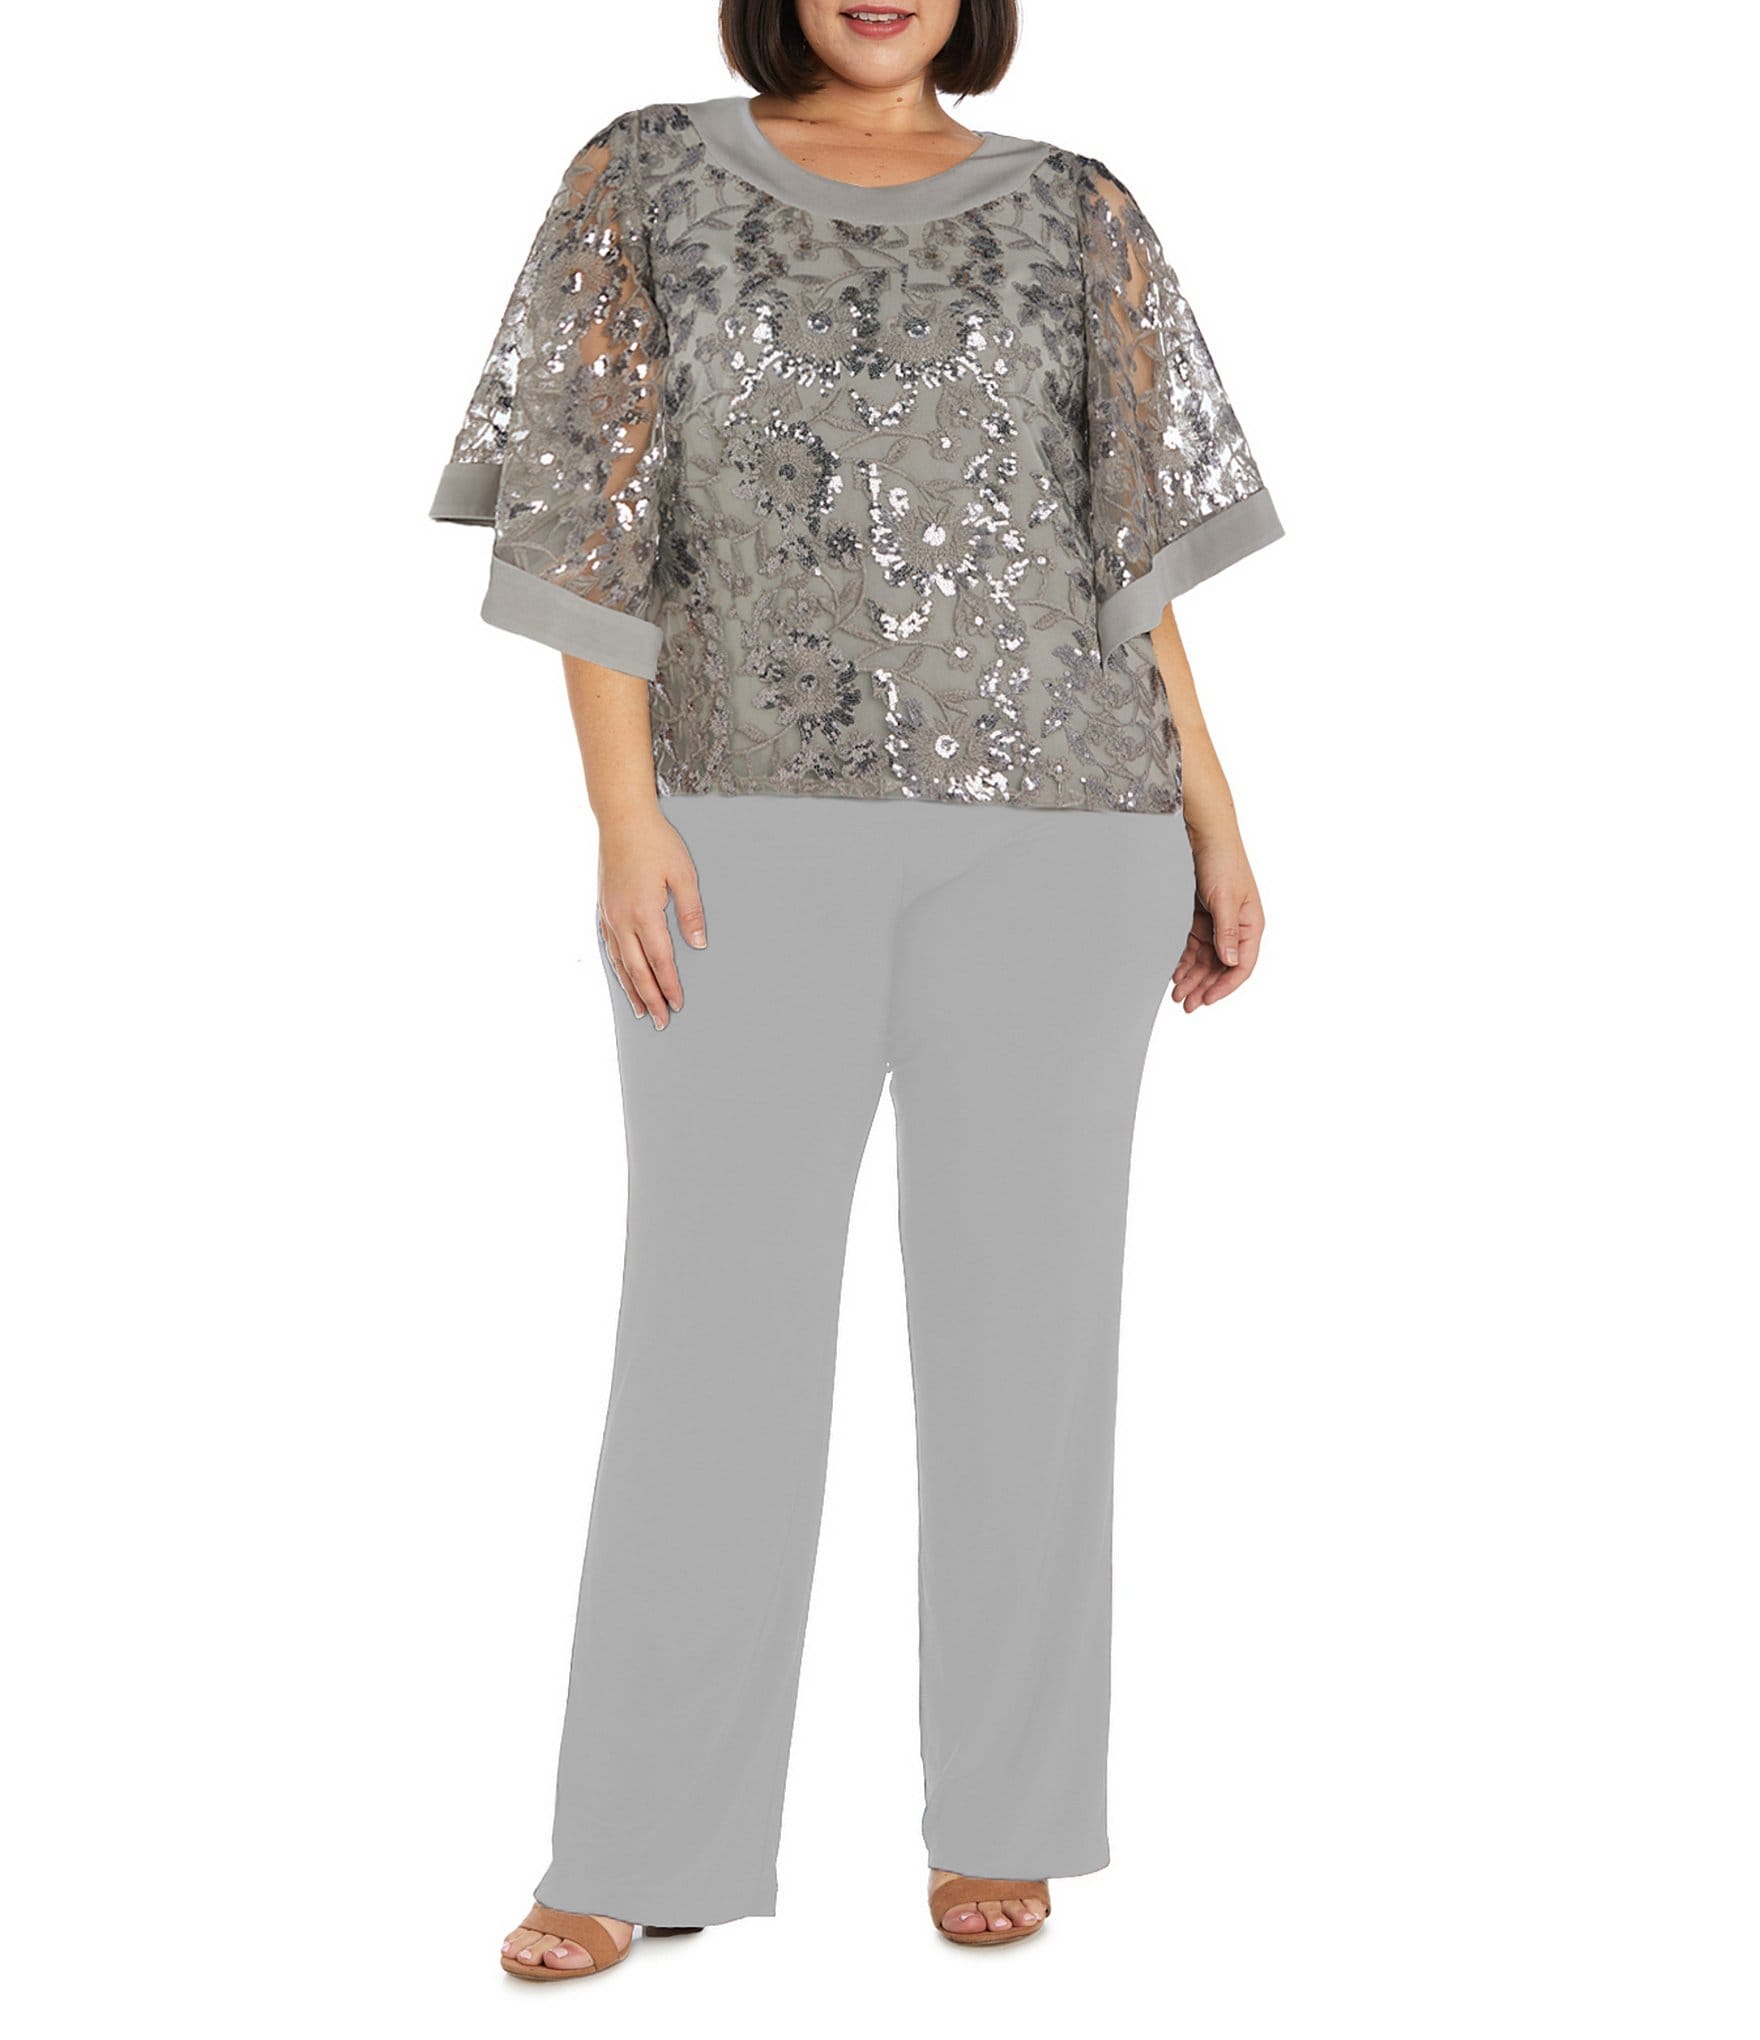 R And M Richards Plus Size Butterfly Sleeve Scoop Neck Sequin 2 Piece Pant Set Dillard S